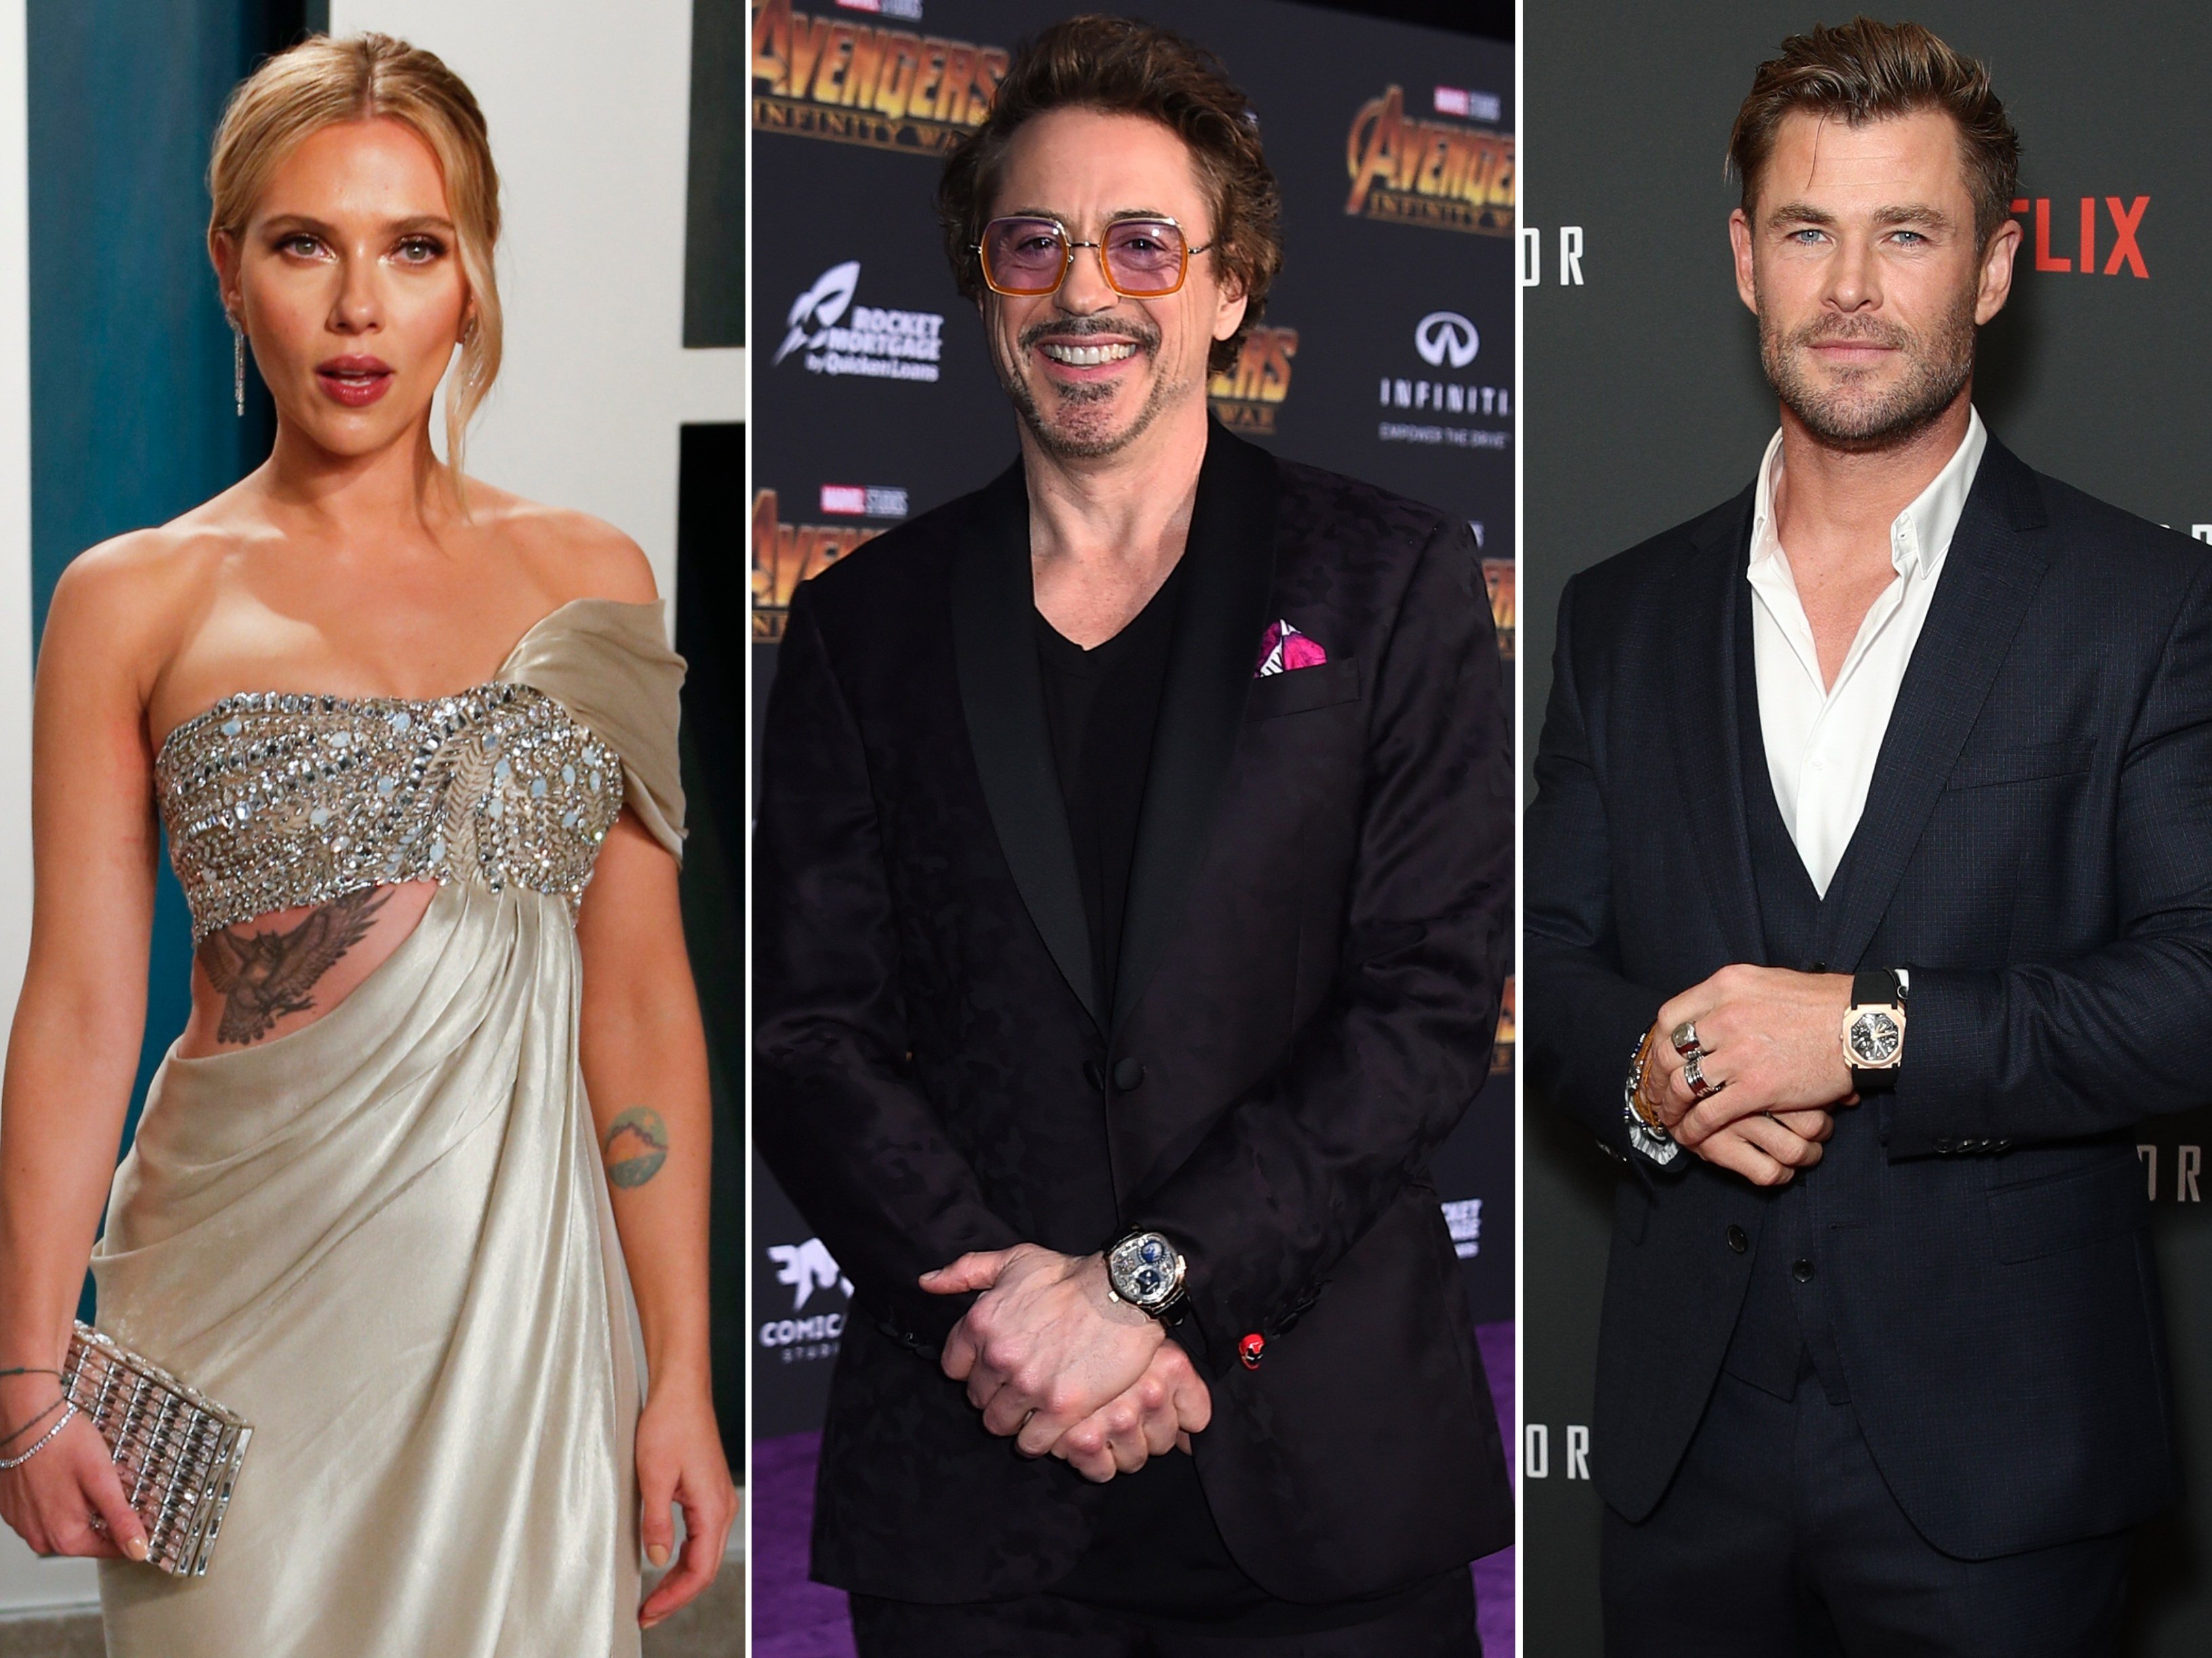 Scarlett Johansson, Robert Downey Jr and Chris Hemsworth have made millions thanks to their Marvel roles. Photos: AP, WireImage, EPA